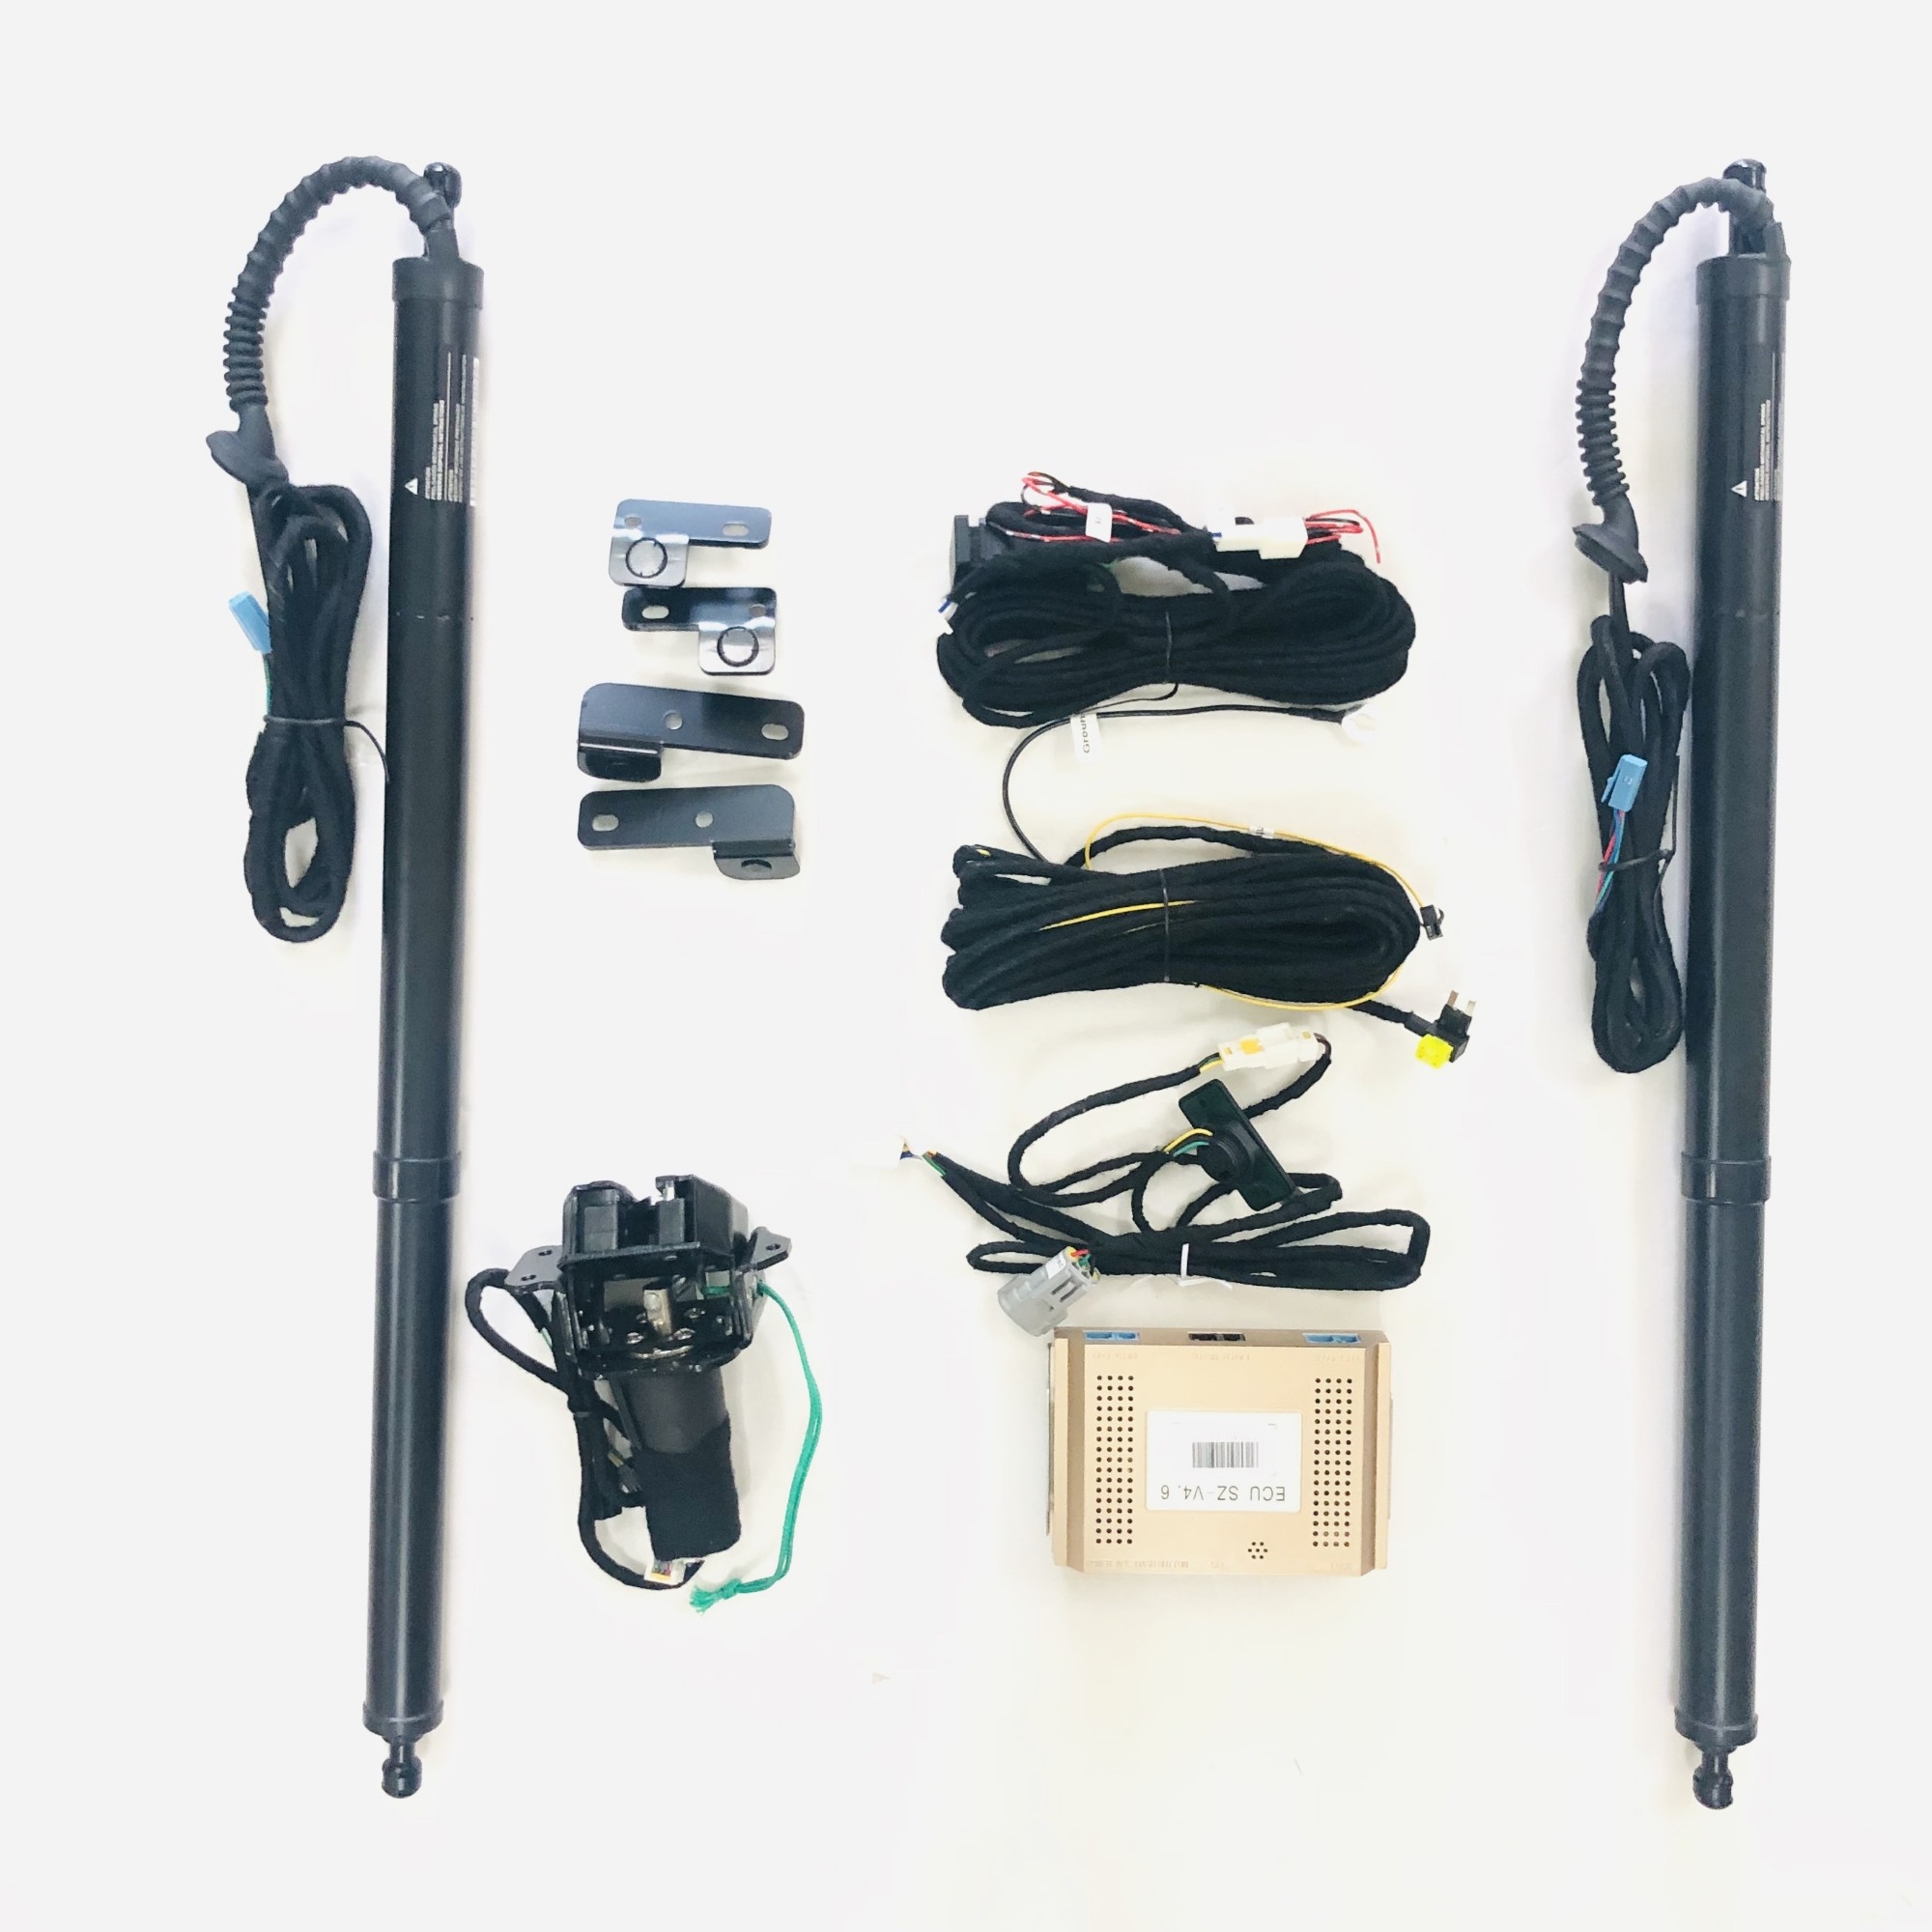 Car lift automatic subaru electric tailgate lift with remote control